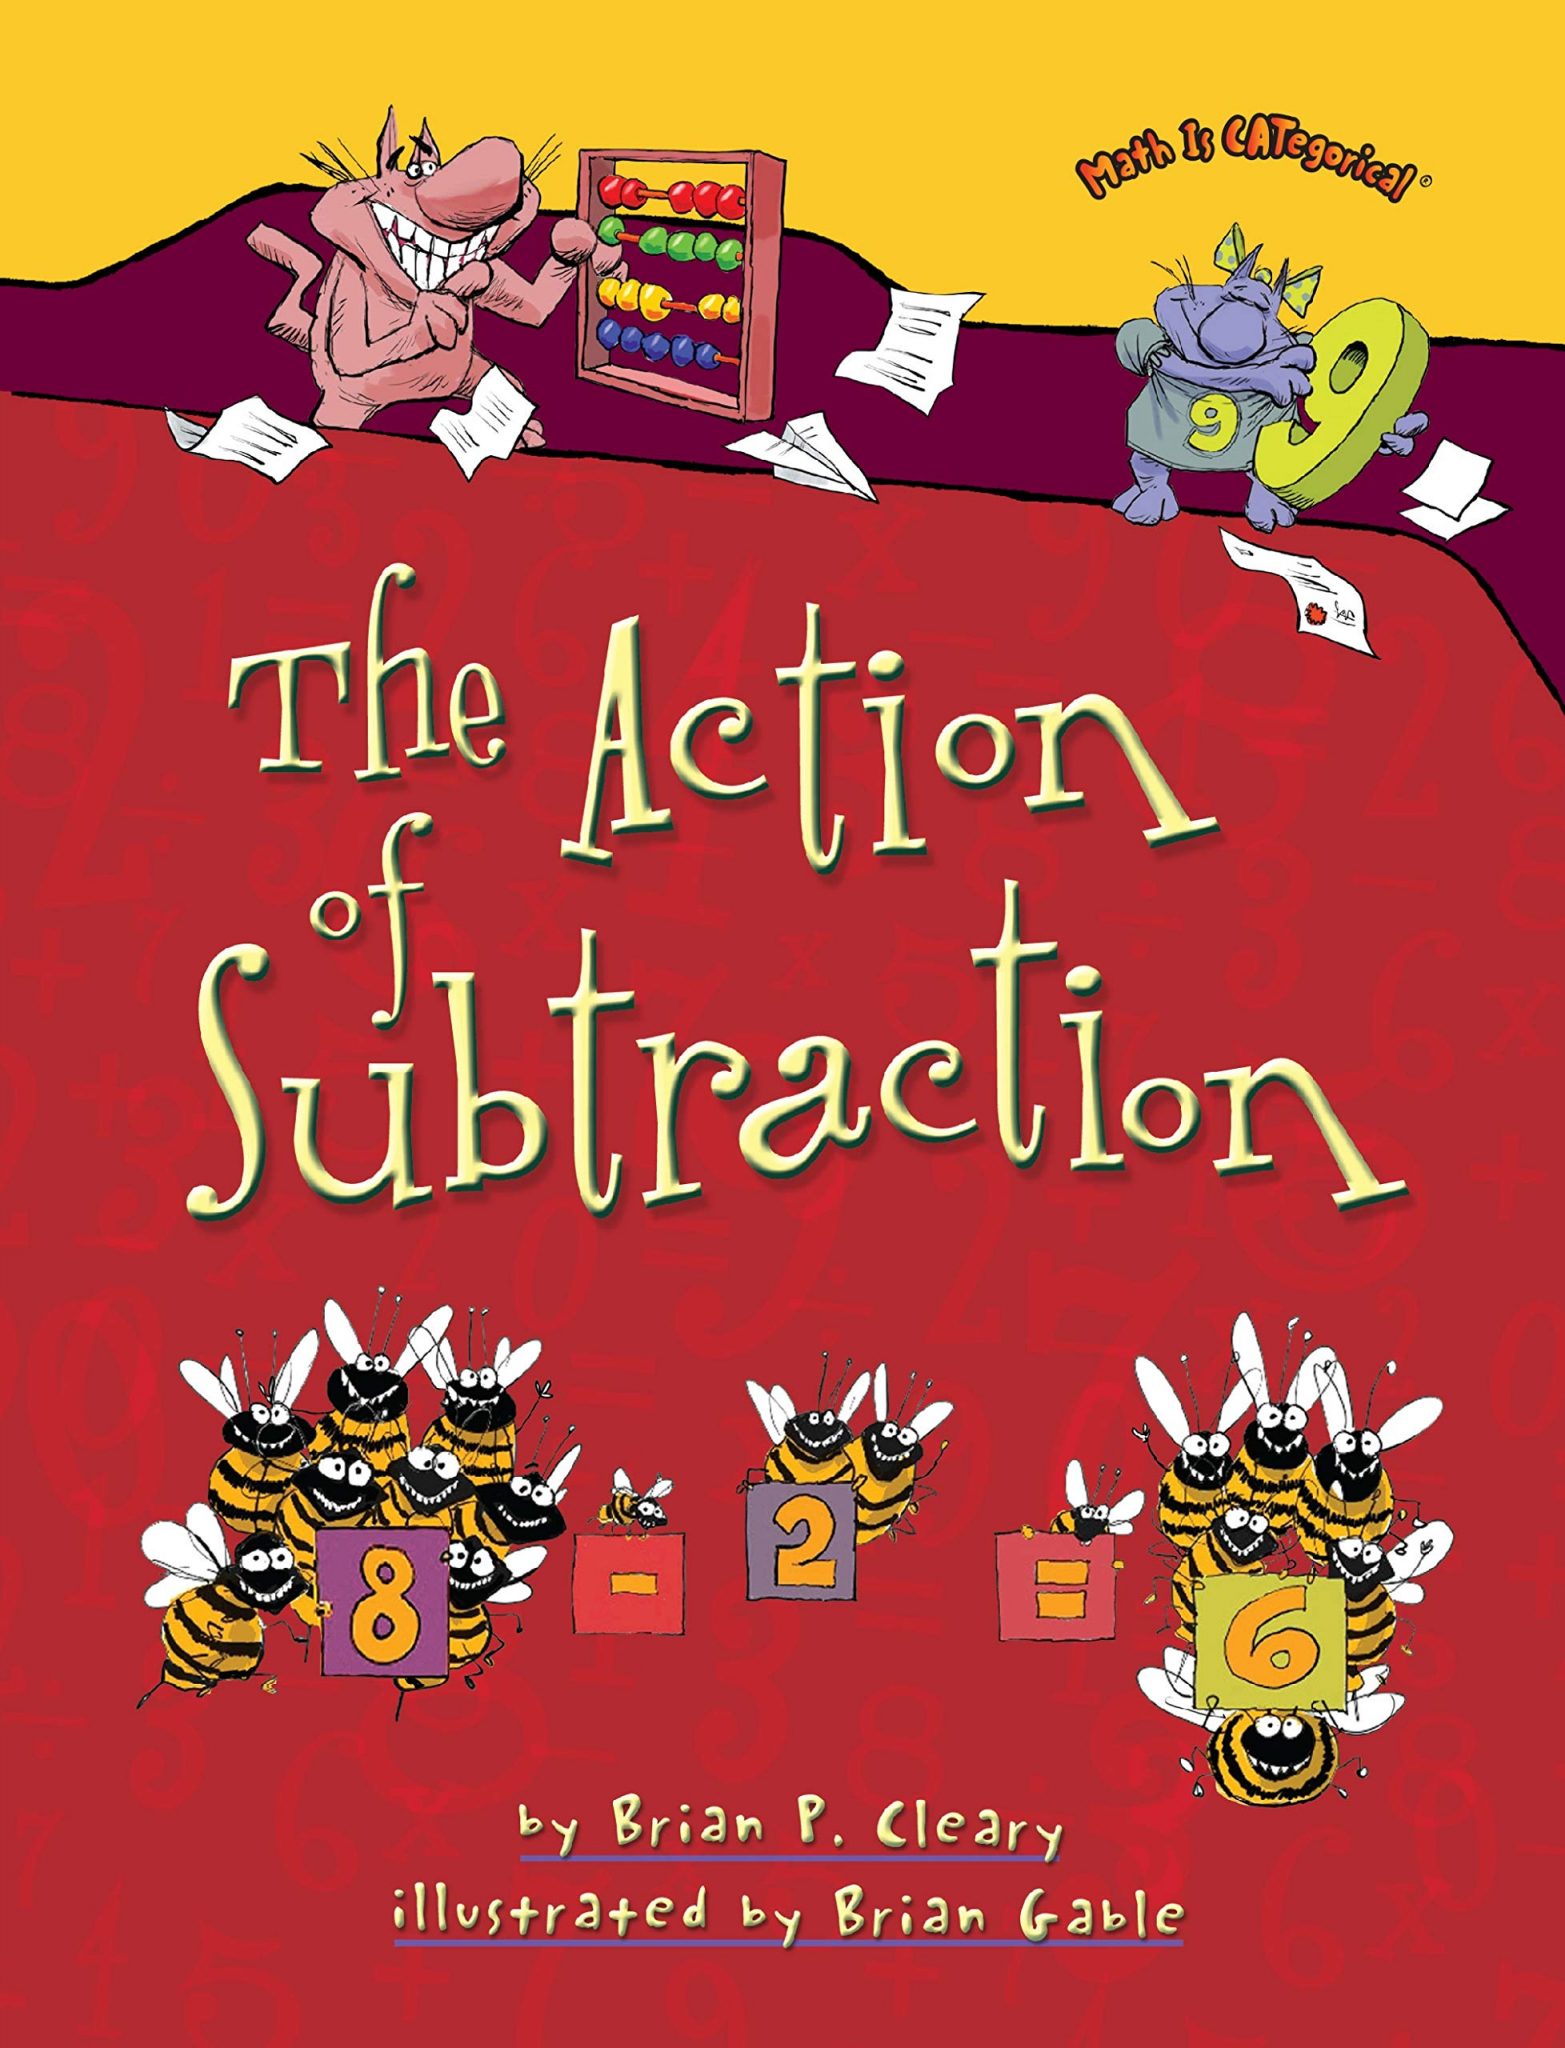 subtraction books for kids